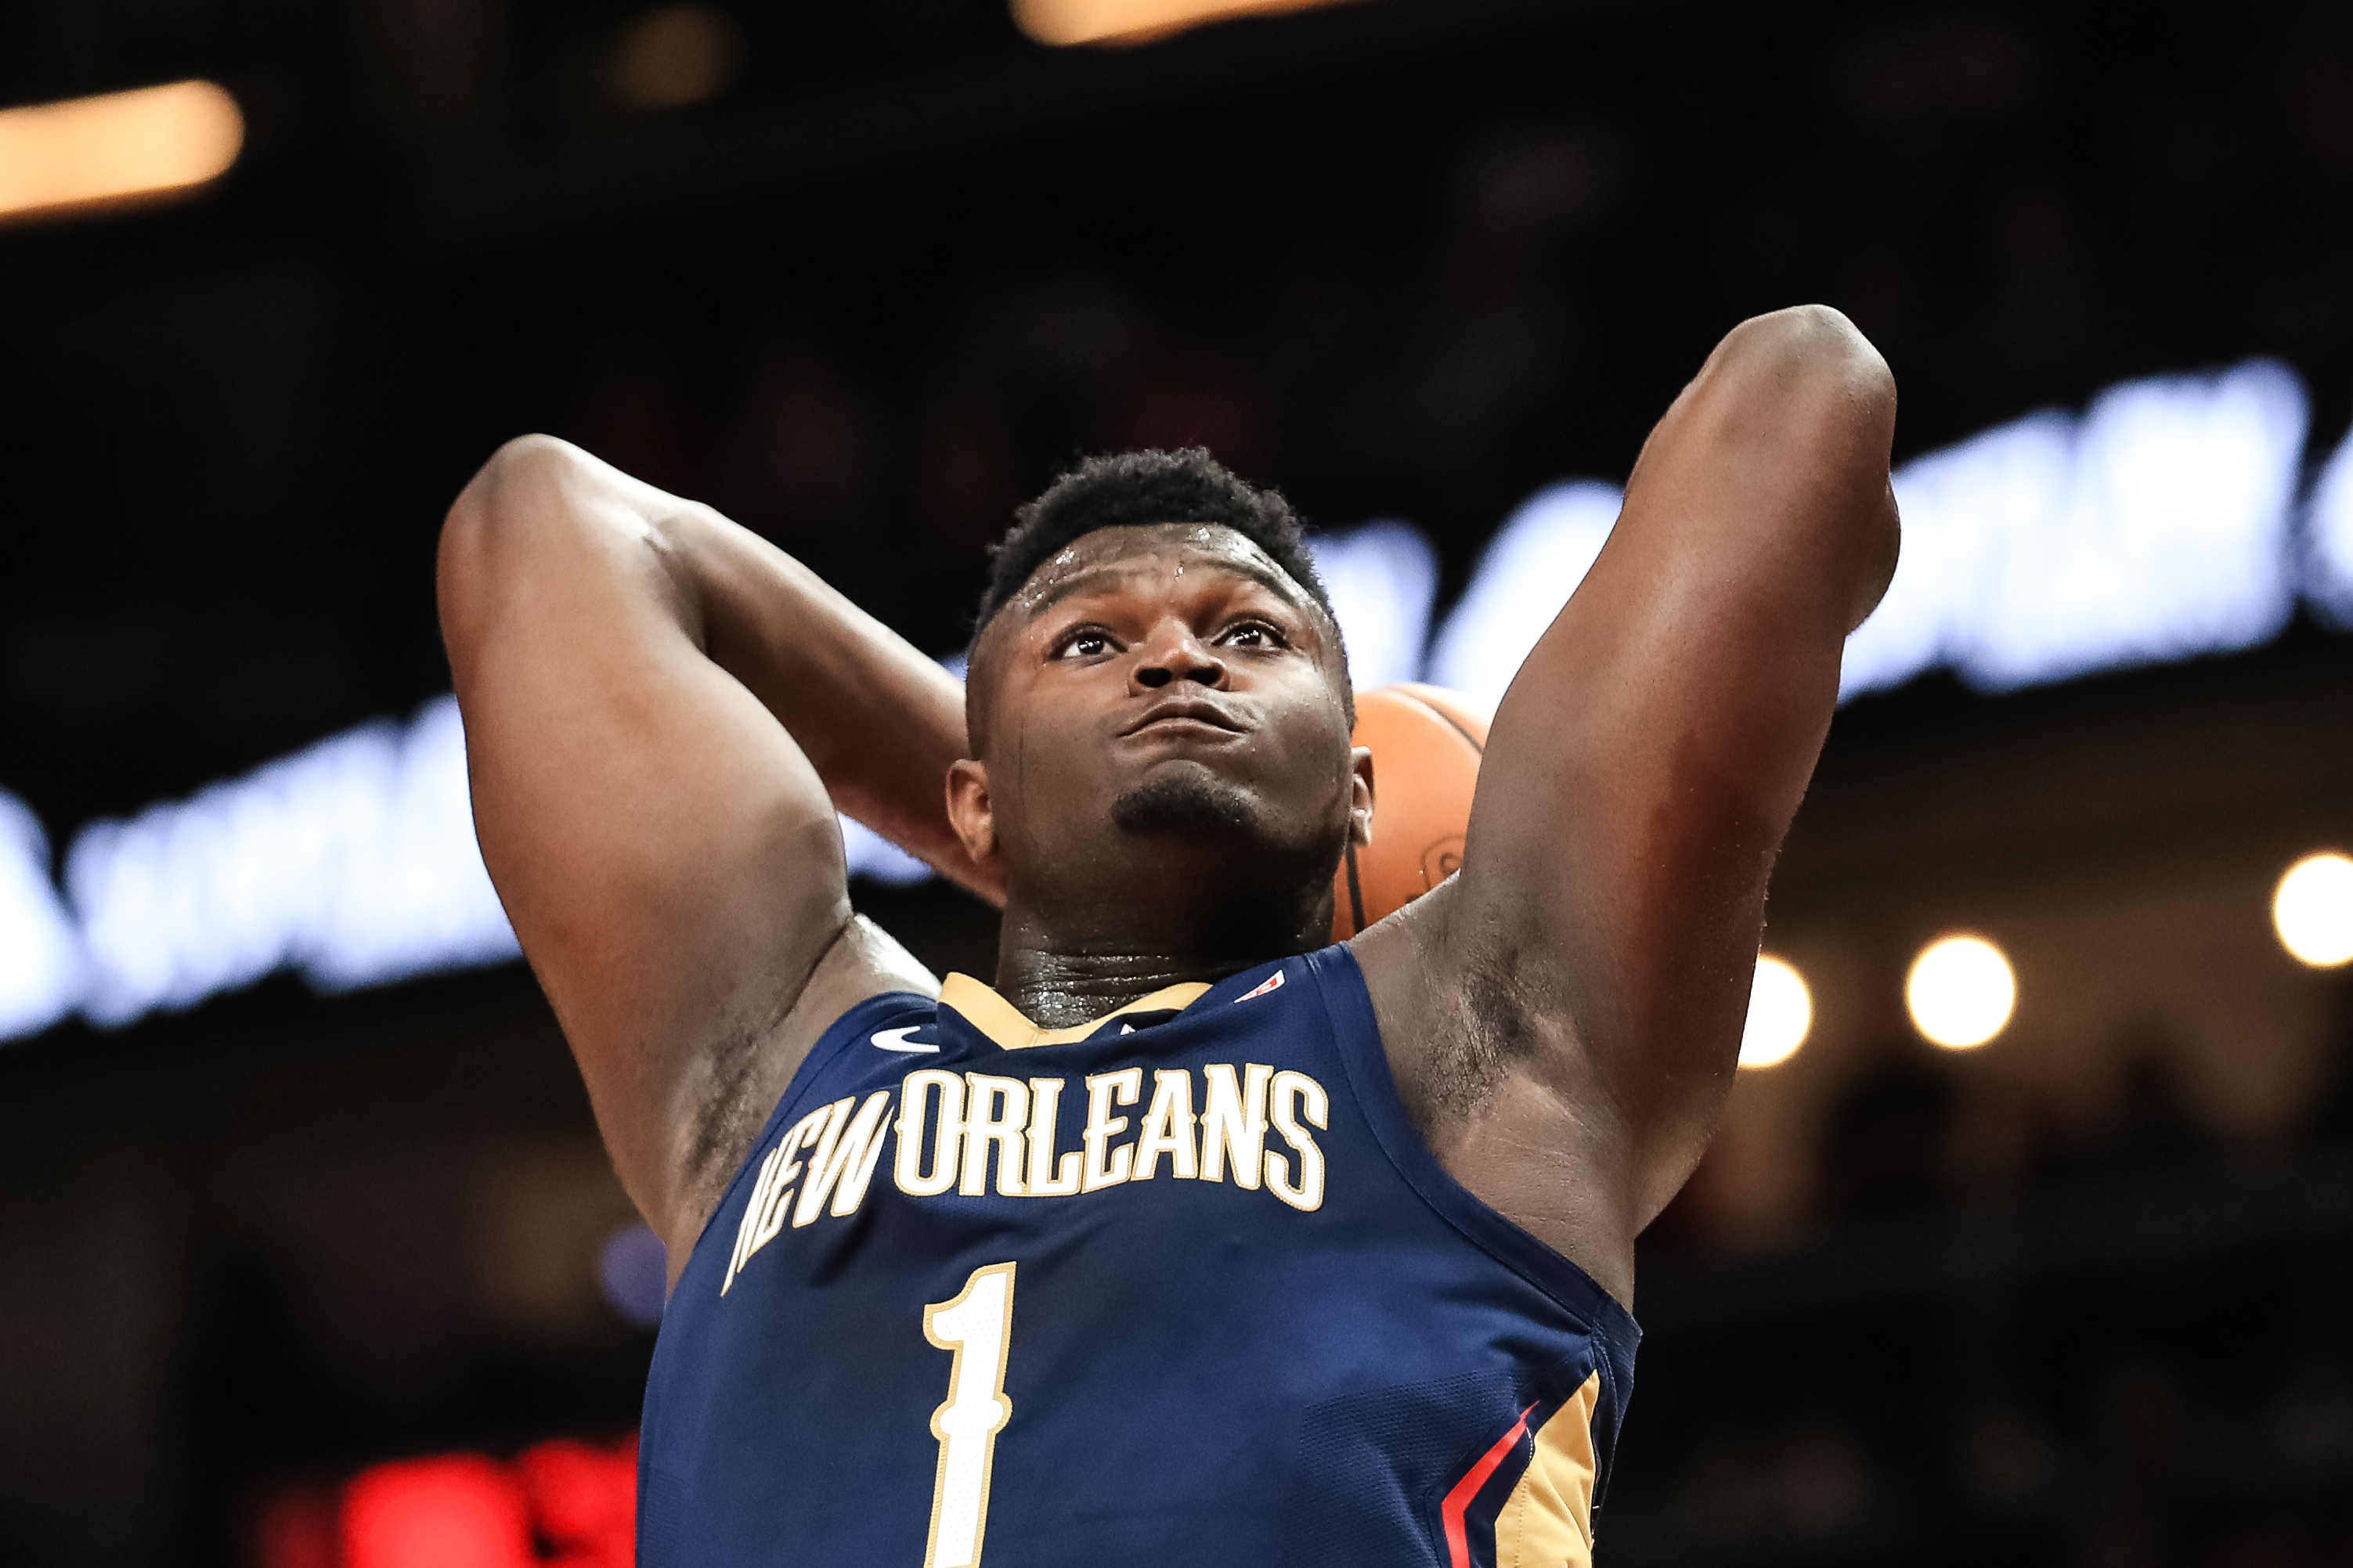 Zion Williamson with 16 POINTS vs Hawks